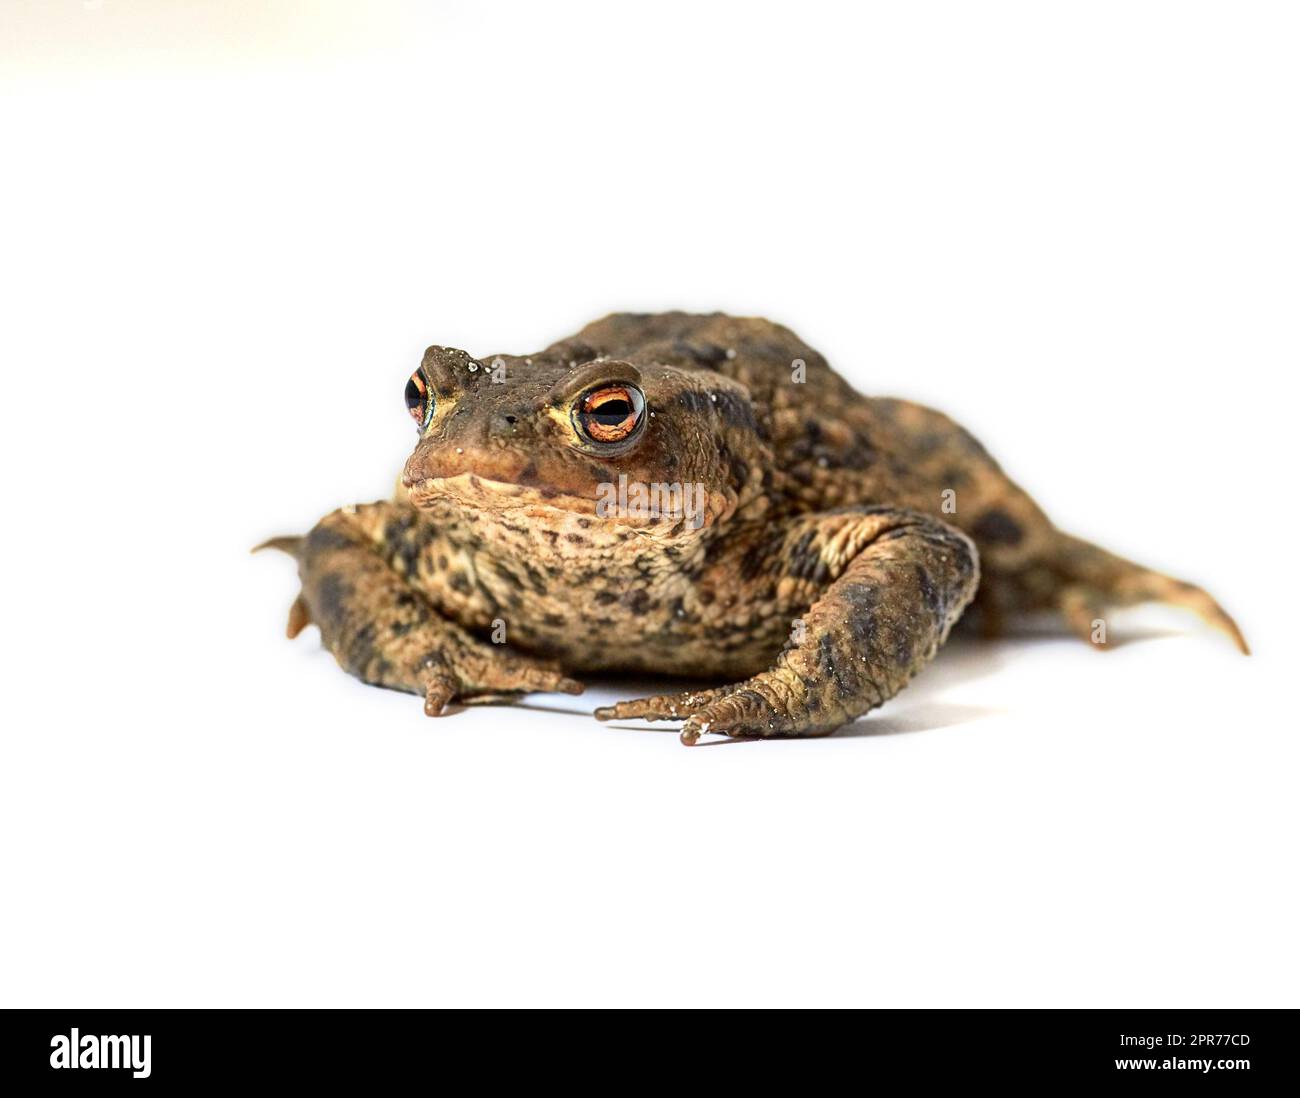 Common true toad with brown body and black dot markings on dry rough skin isolated on a white background with copy space. One frog ready to hop around and croak. Amphibian from the bufonidae species Stock Photo